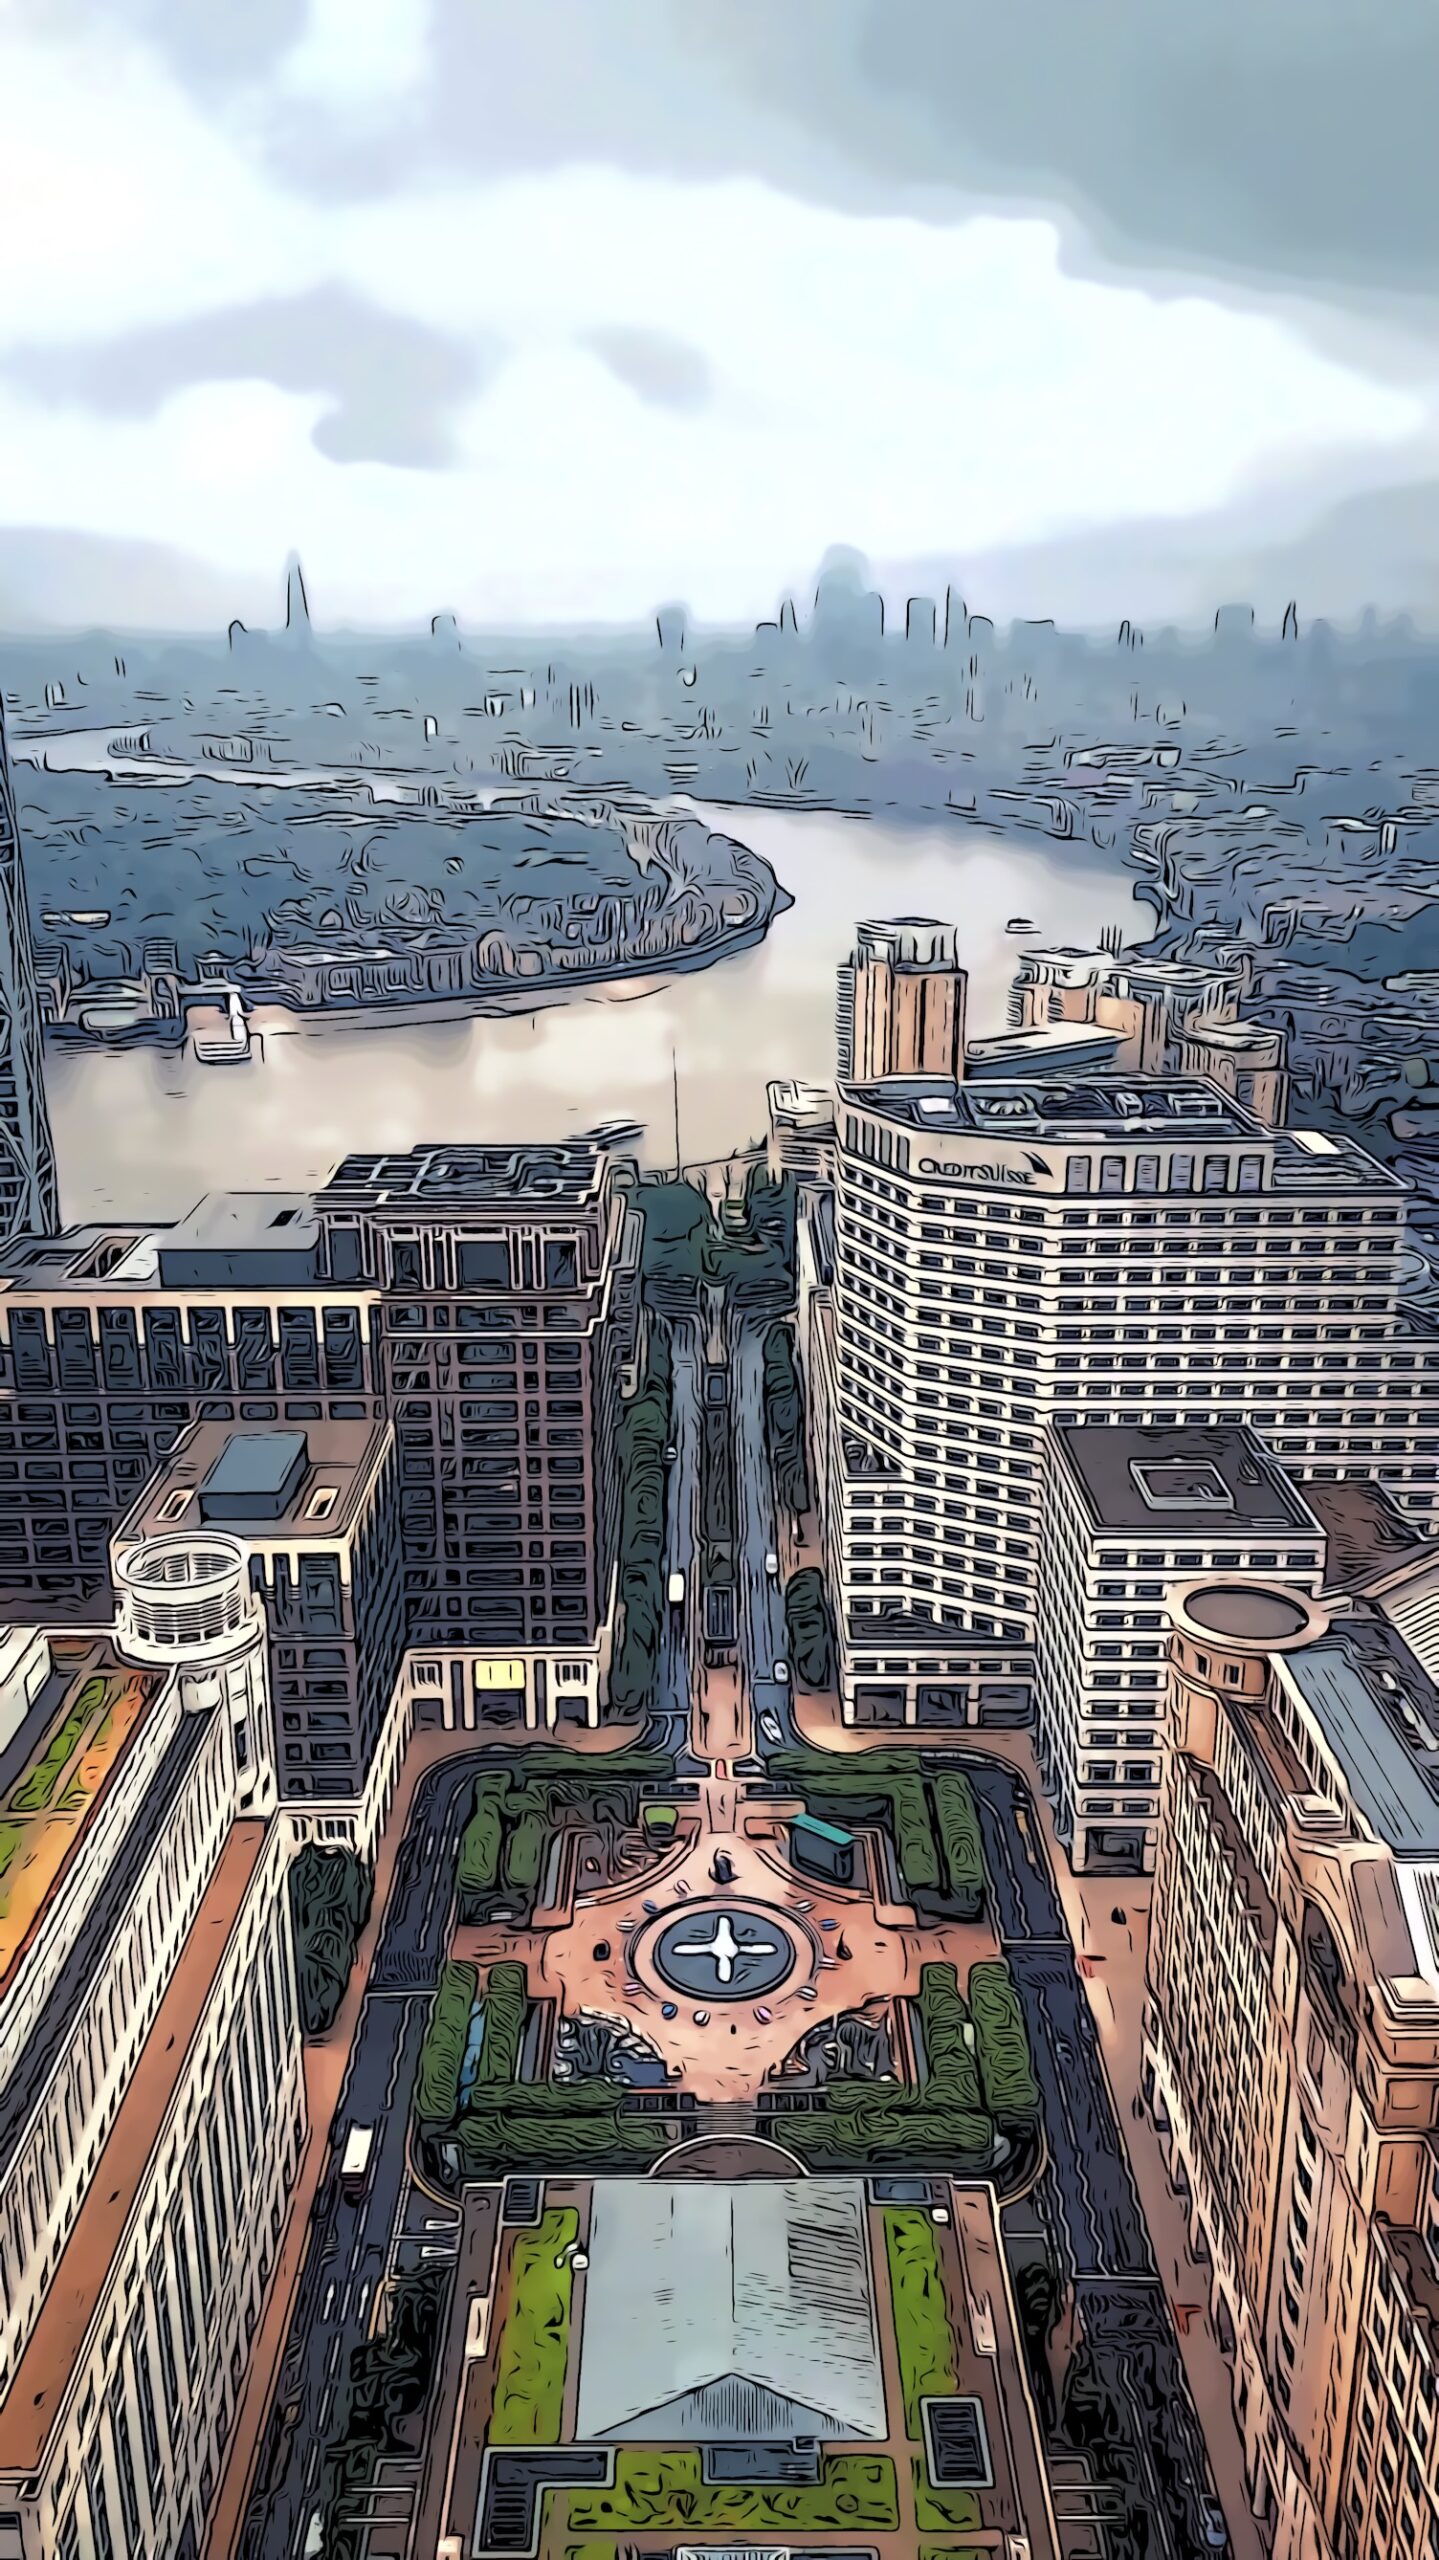 View from the top of canary wharf’s tower